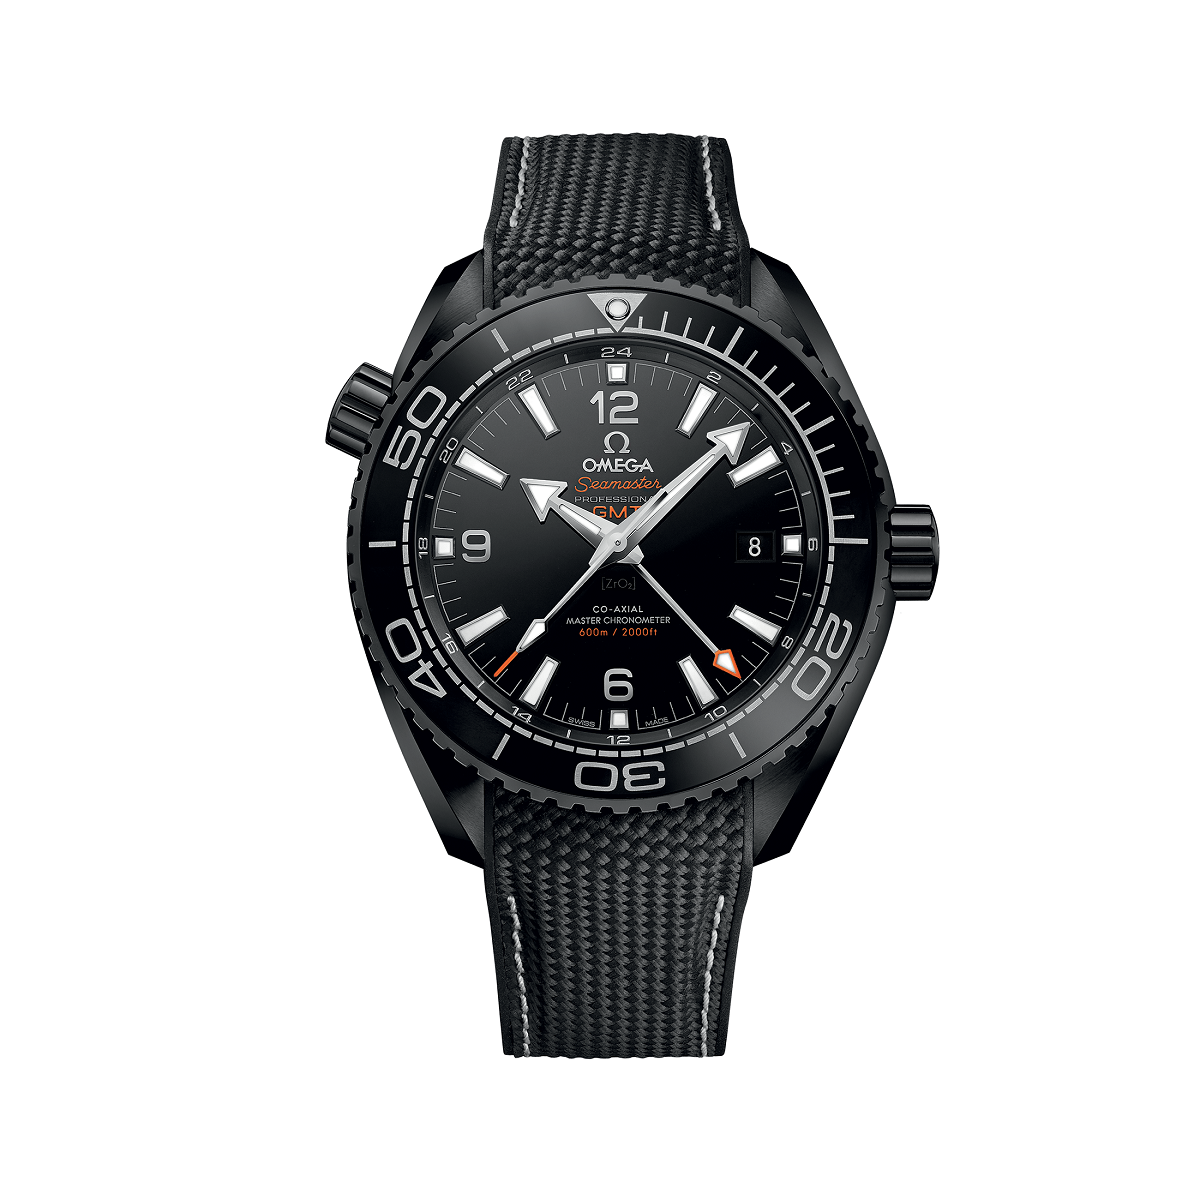 Omega Planet Ocean Master Co-axial Mens Rubber Strap Watch 45.5mm - 215.92.46.22.01.001